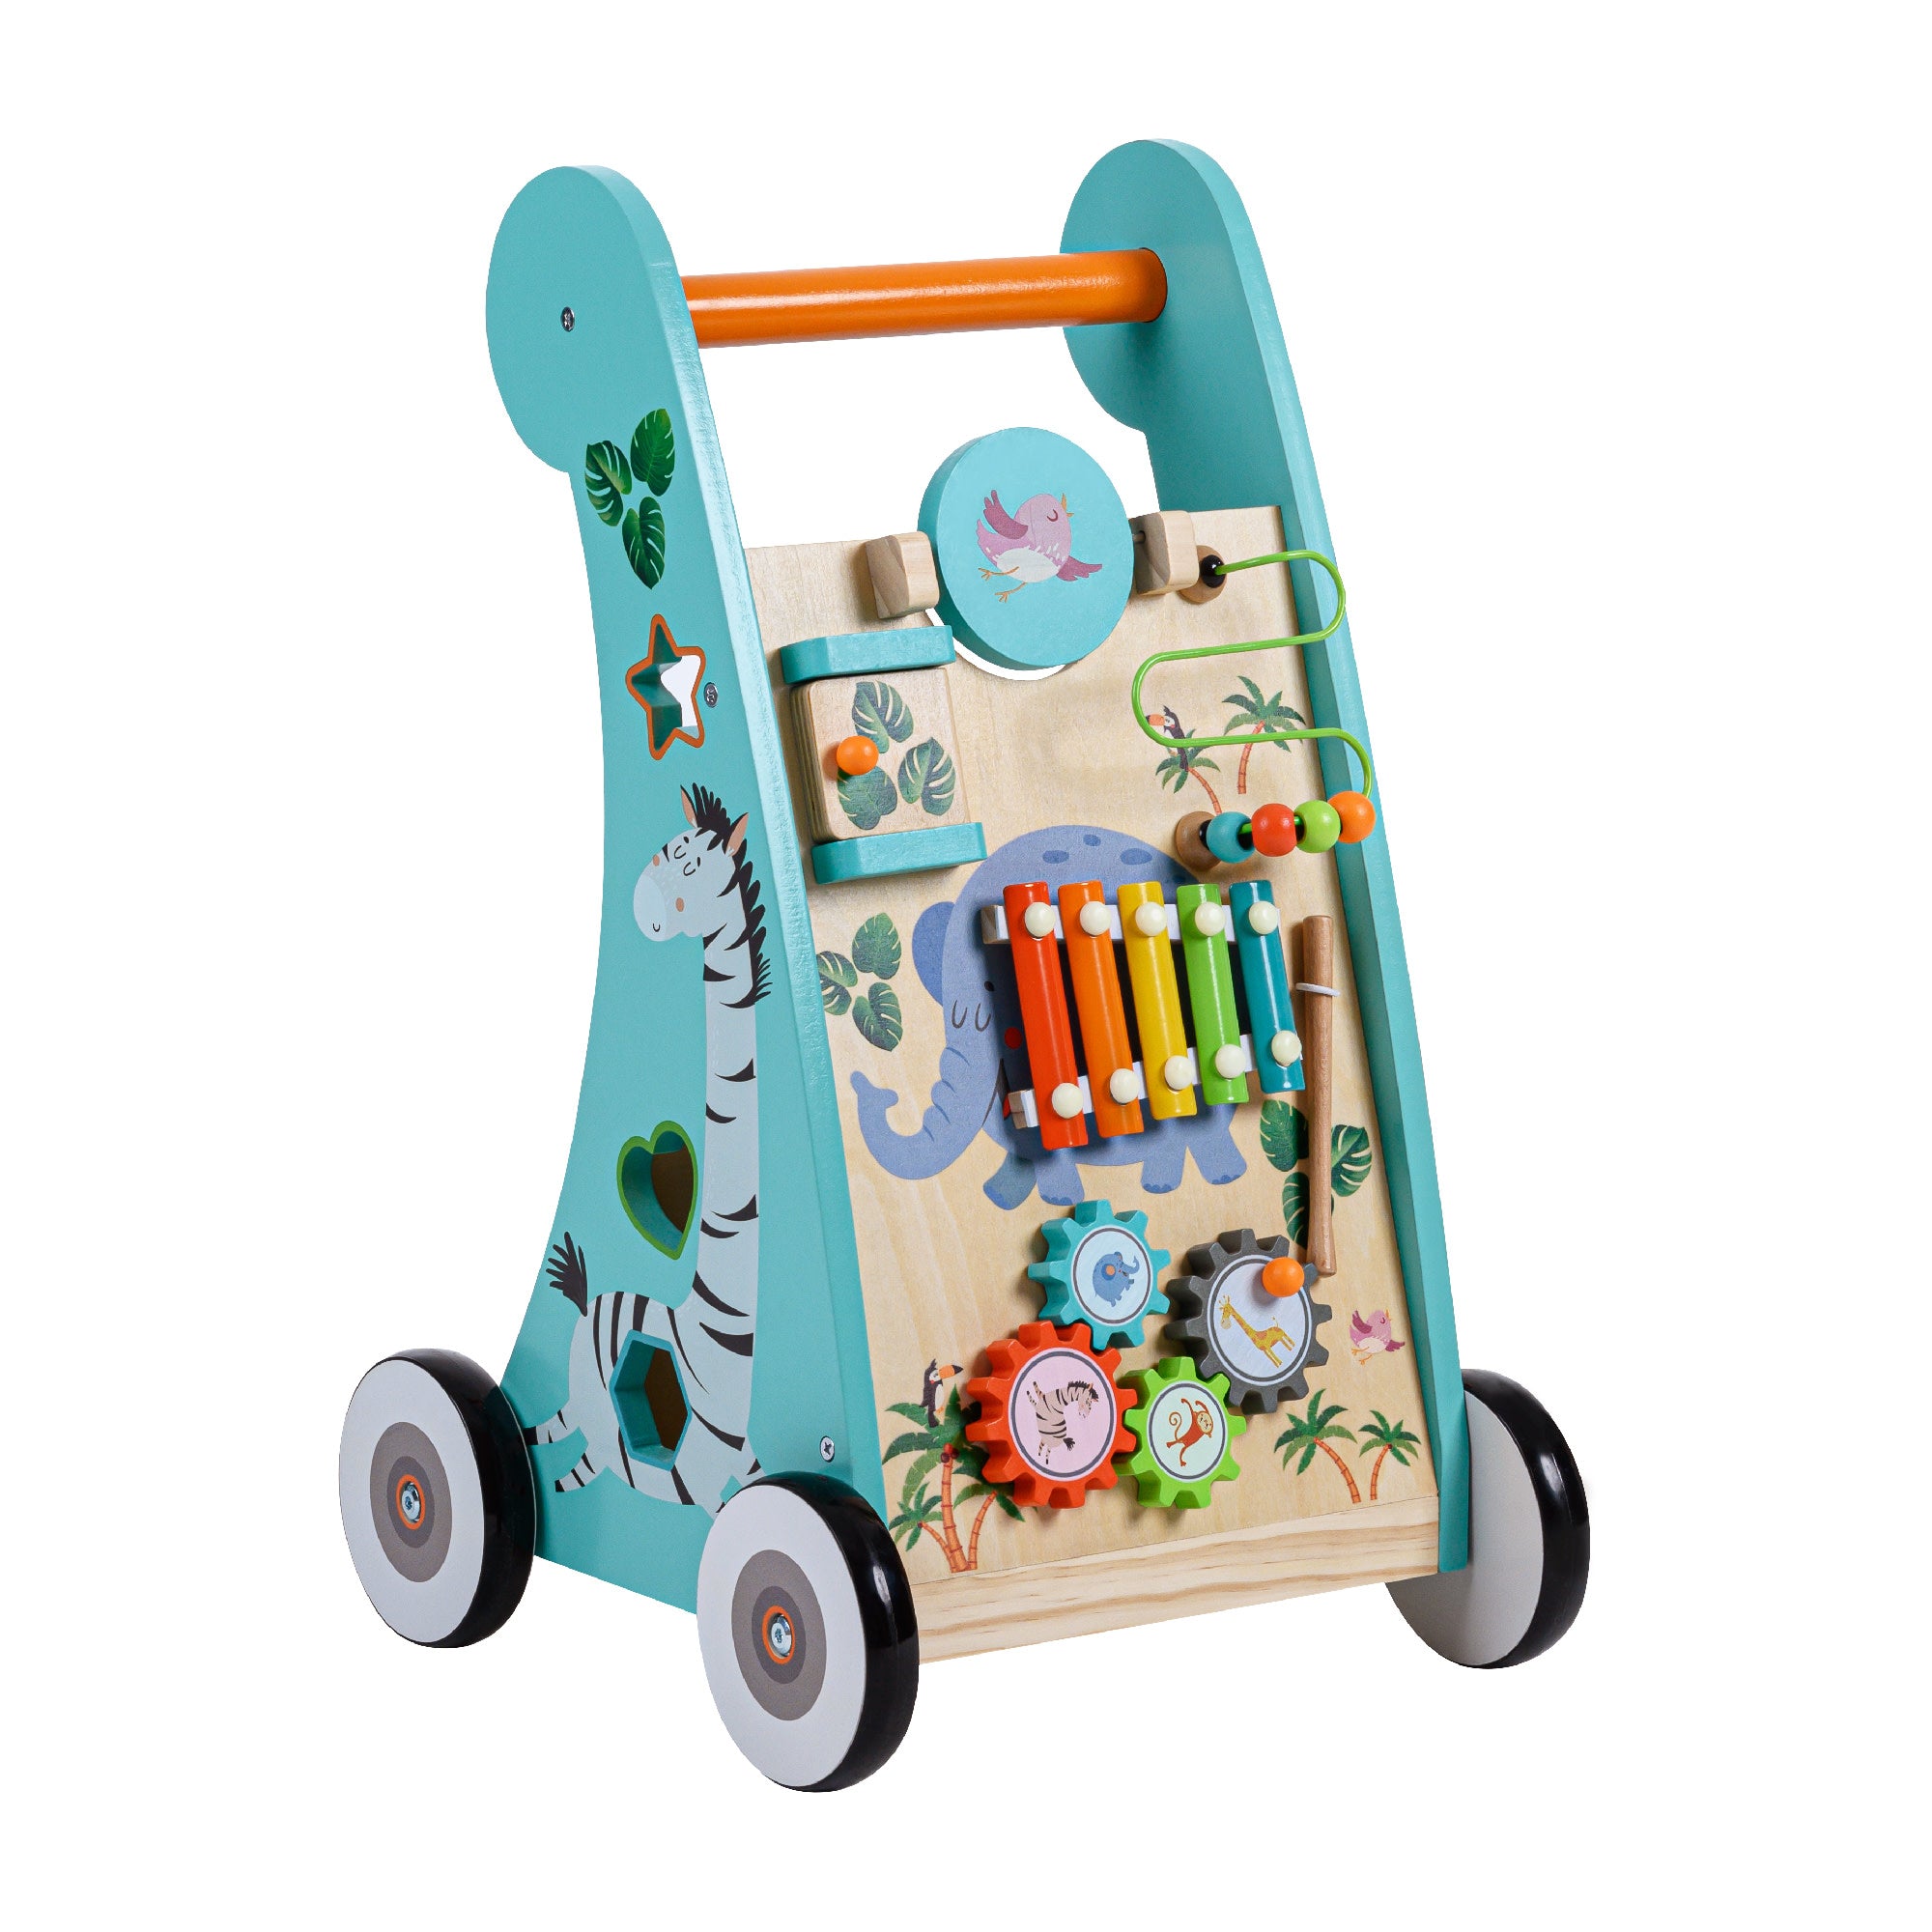 Teamson Kids Preschool Play Lab Wooden Baby Walker and Activity Station, Natural/Blue